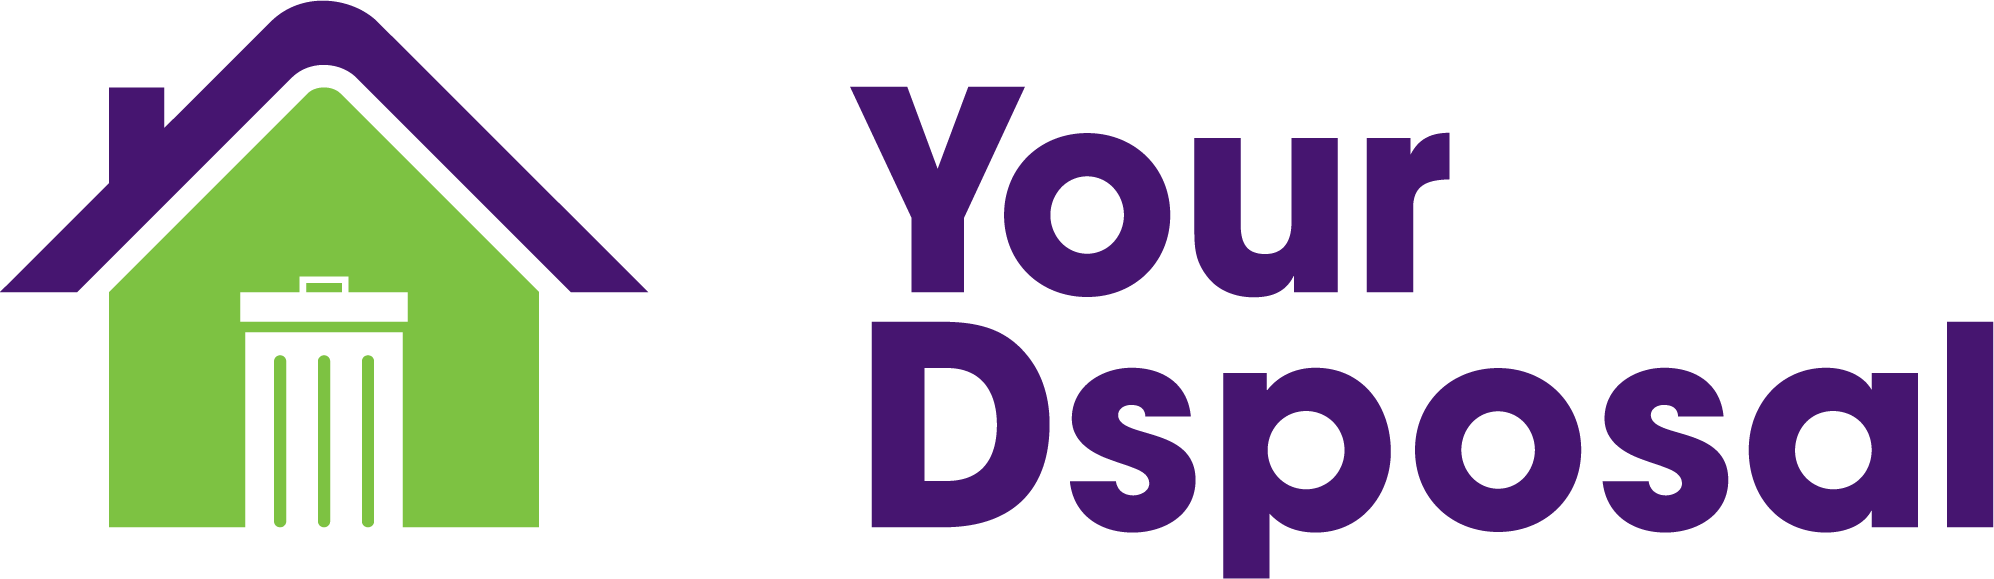 The logo for the company Your Dsposal